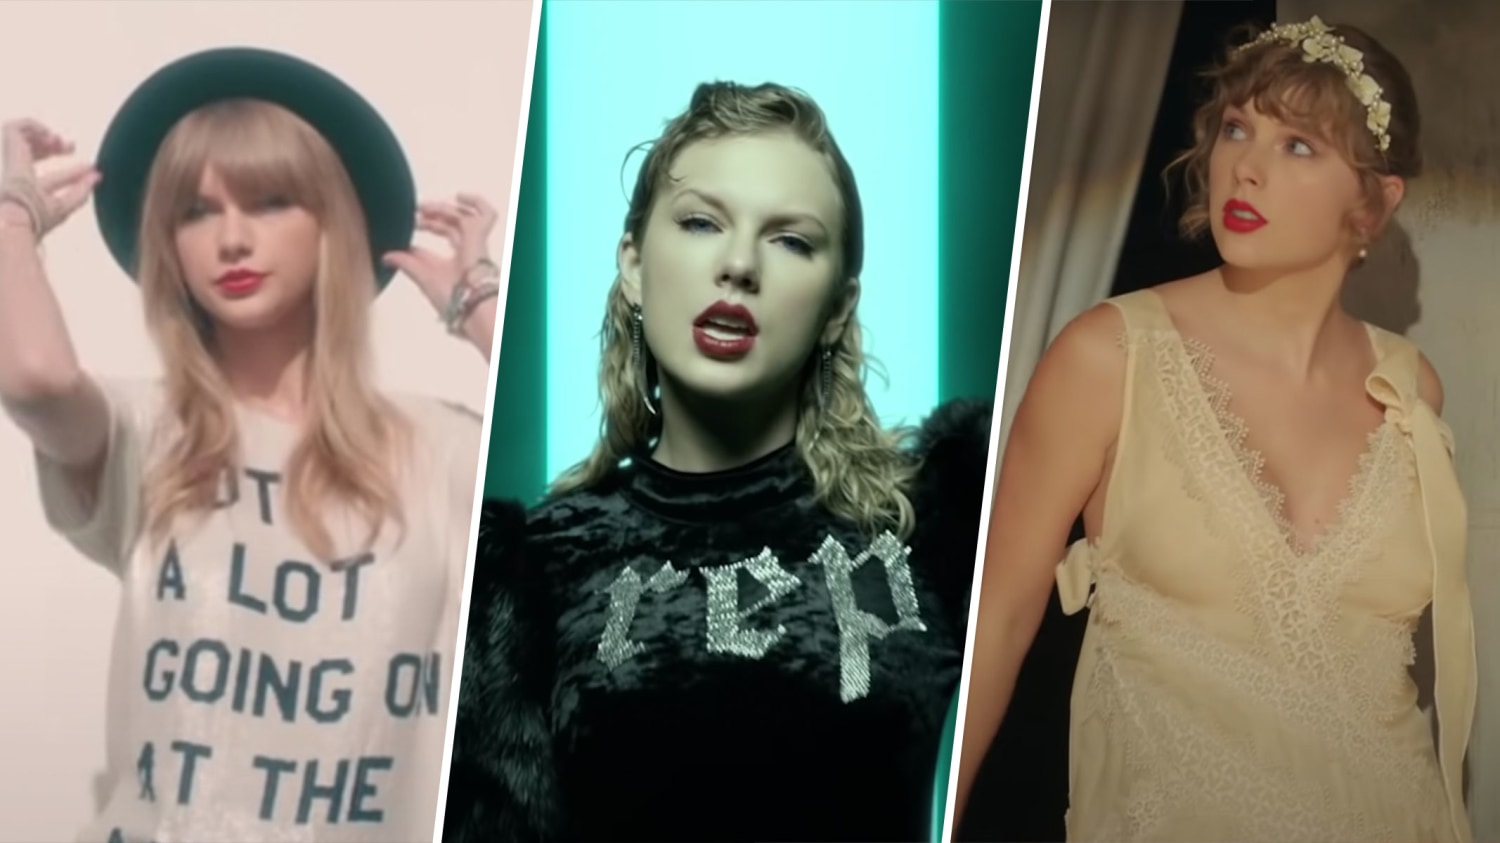 Taylor Swift Lover: Who is each song about on Taylor Swift's Lover?